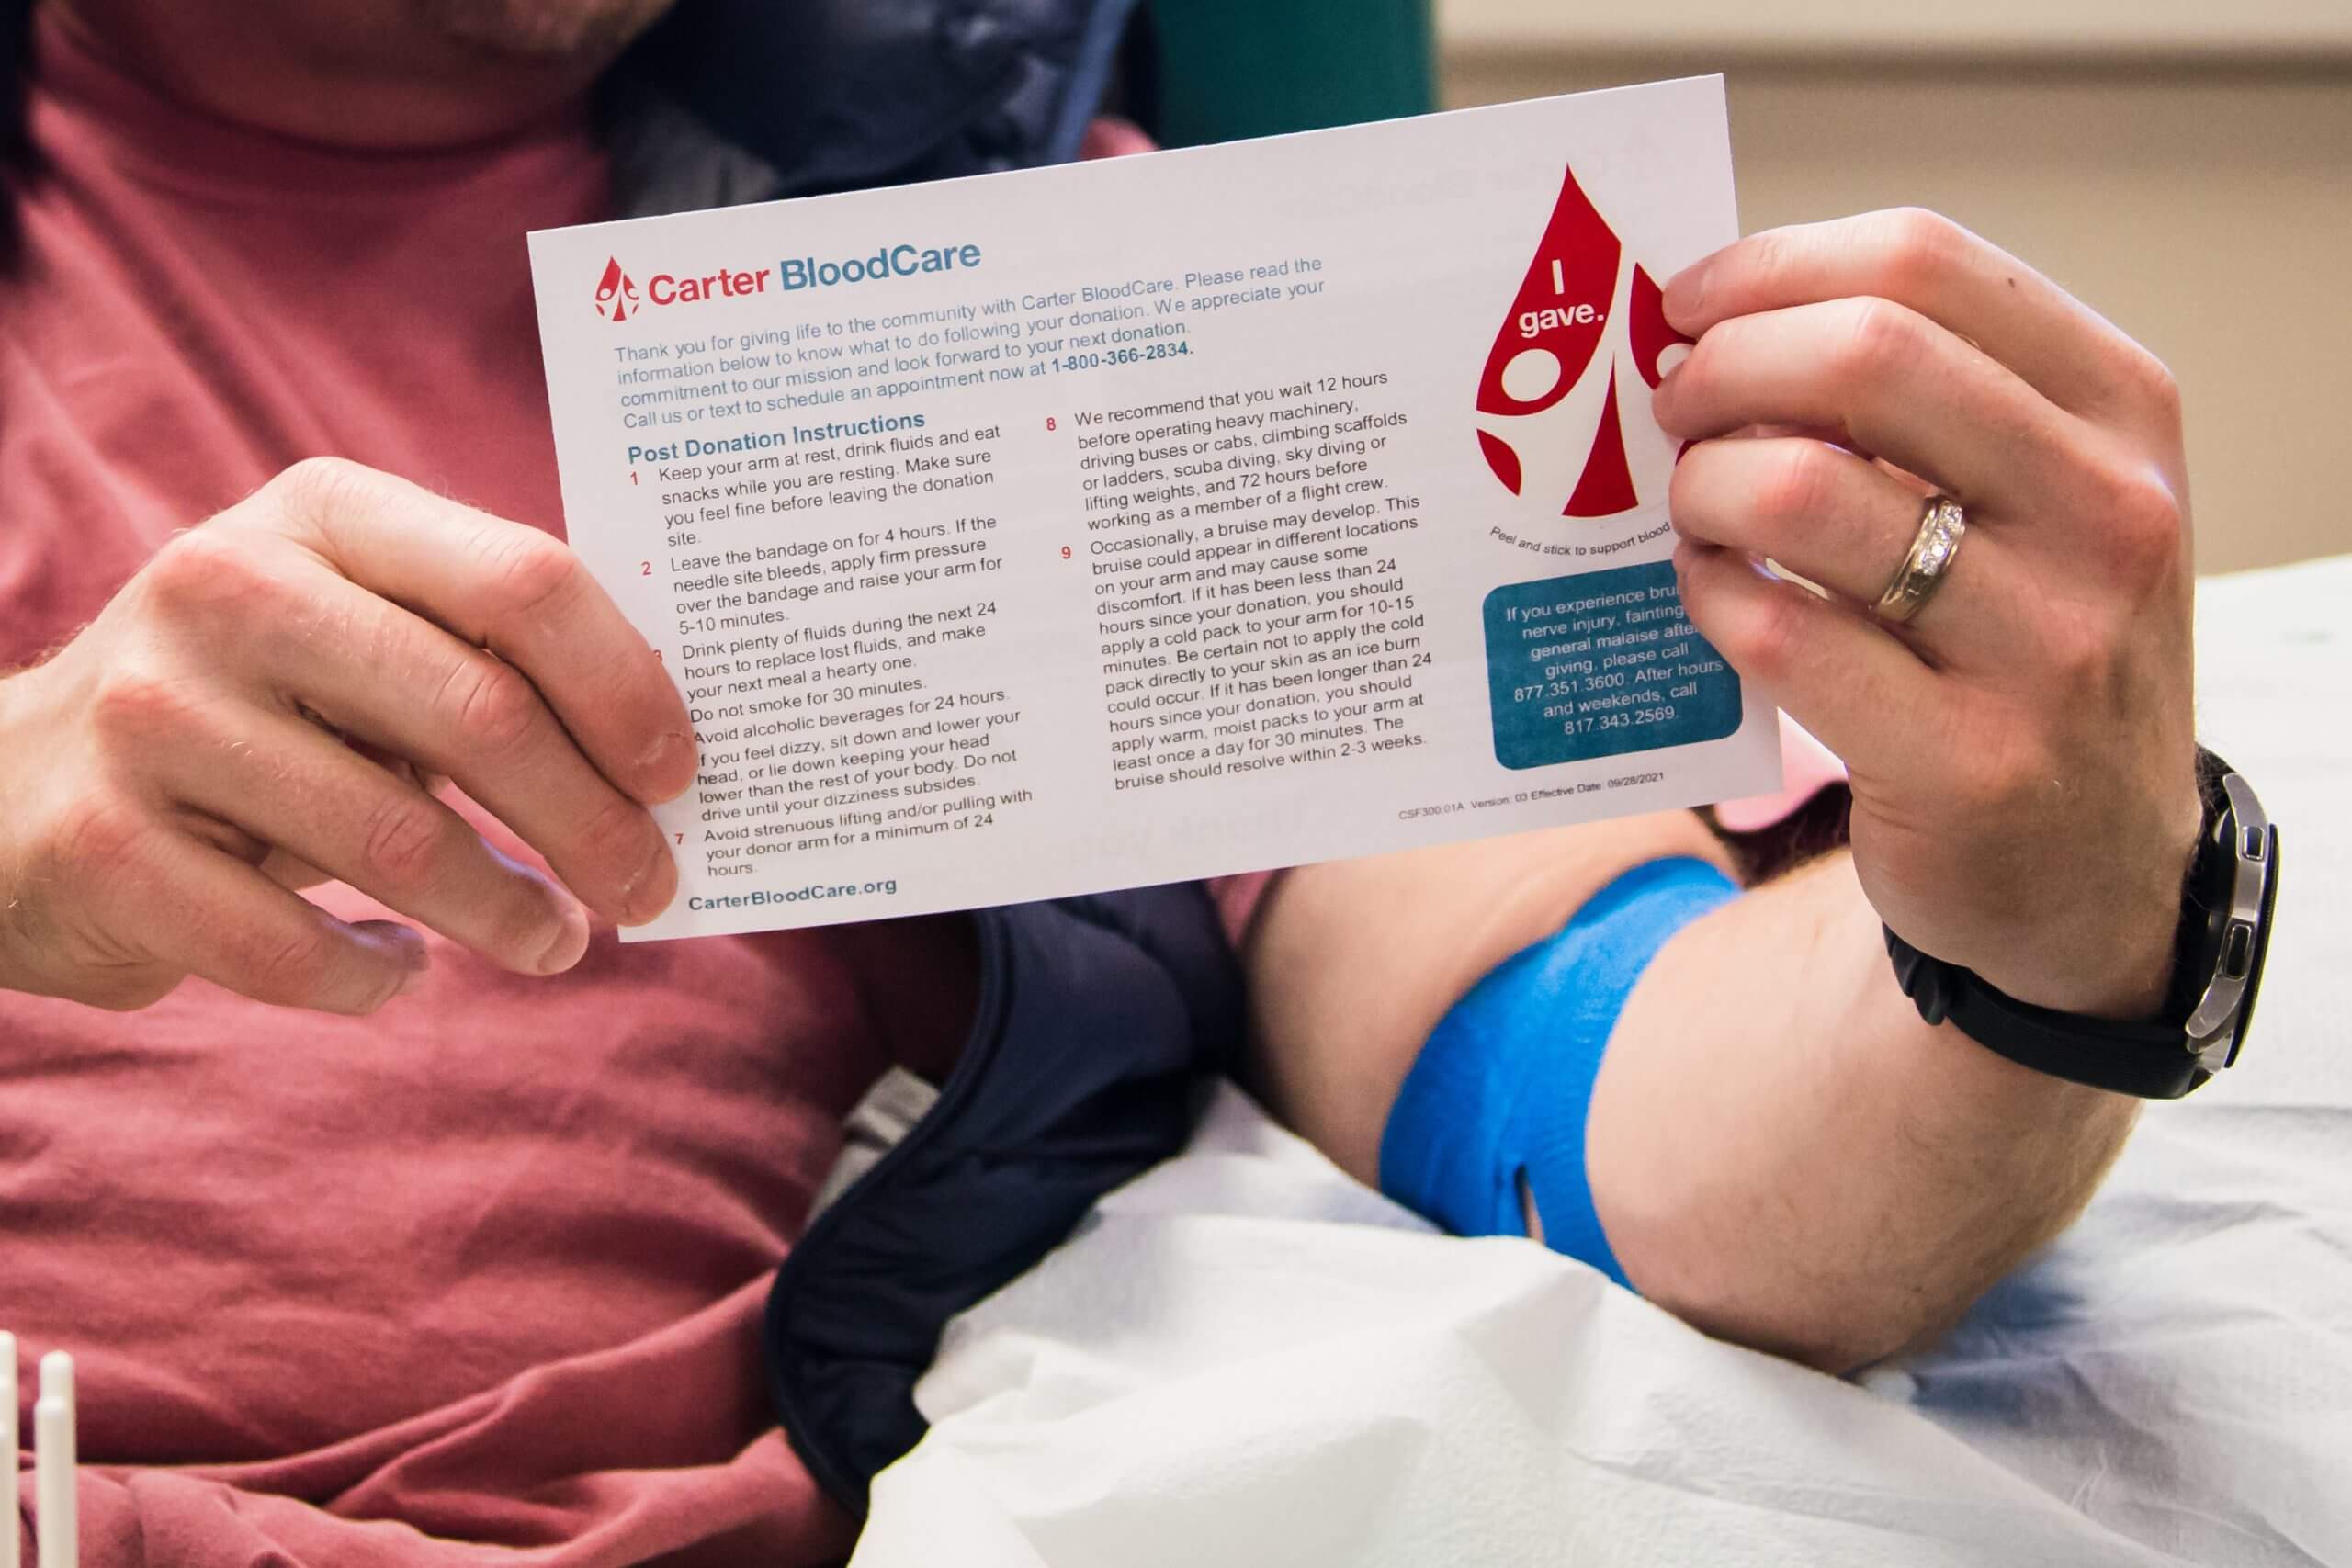 Benefits of being a Carter BloodCare donor